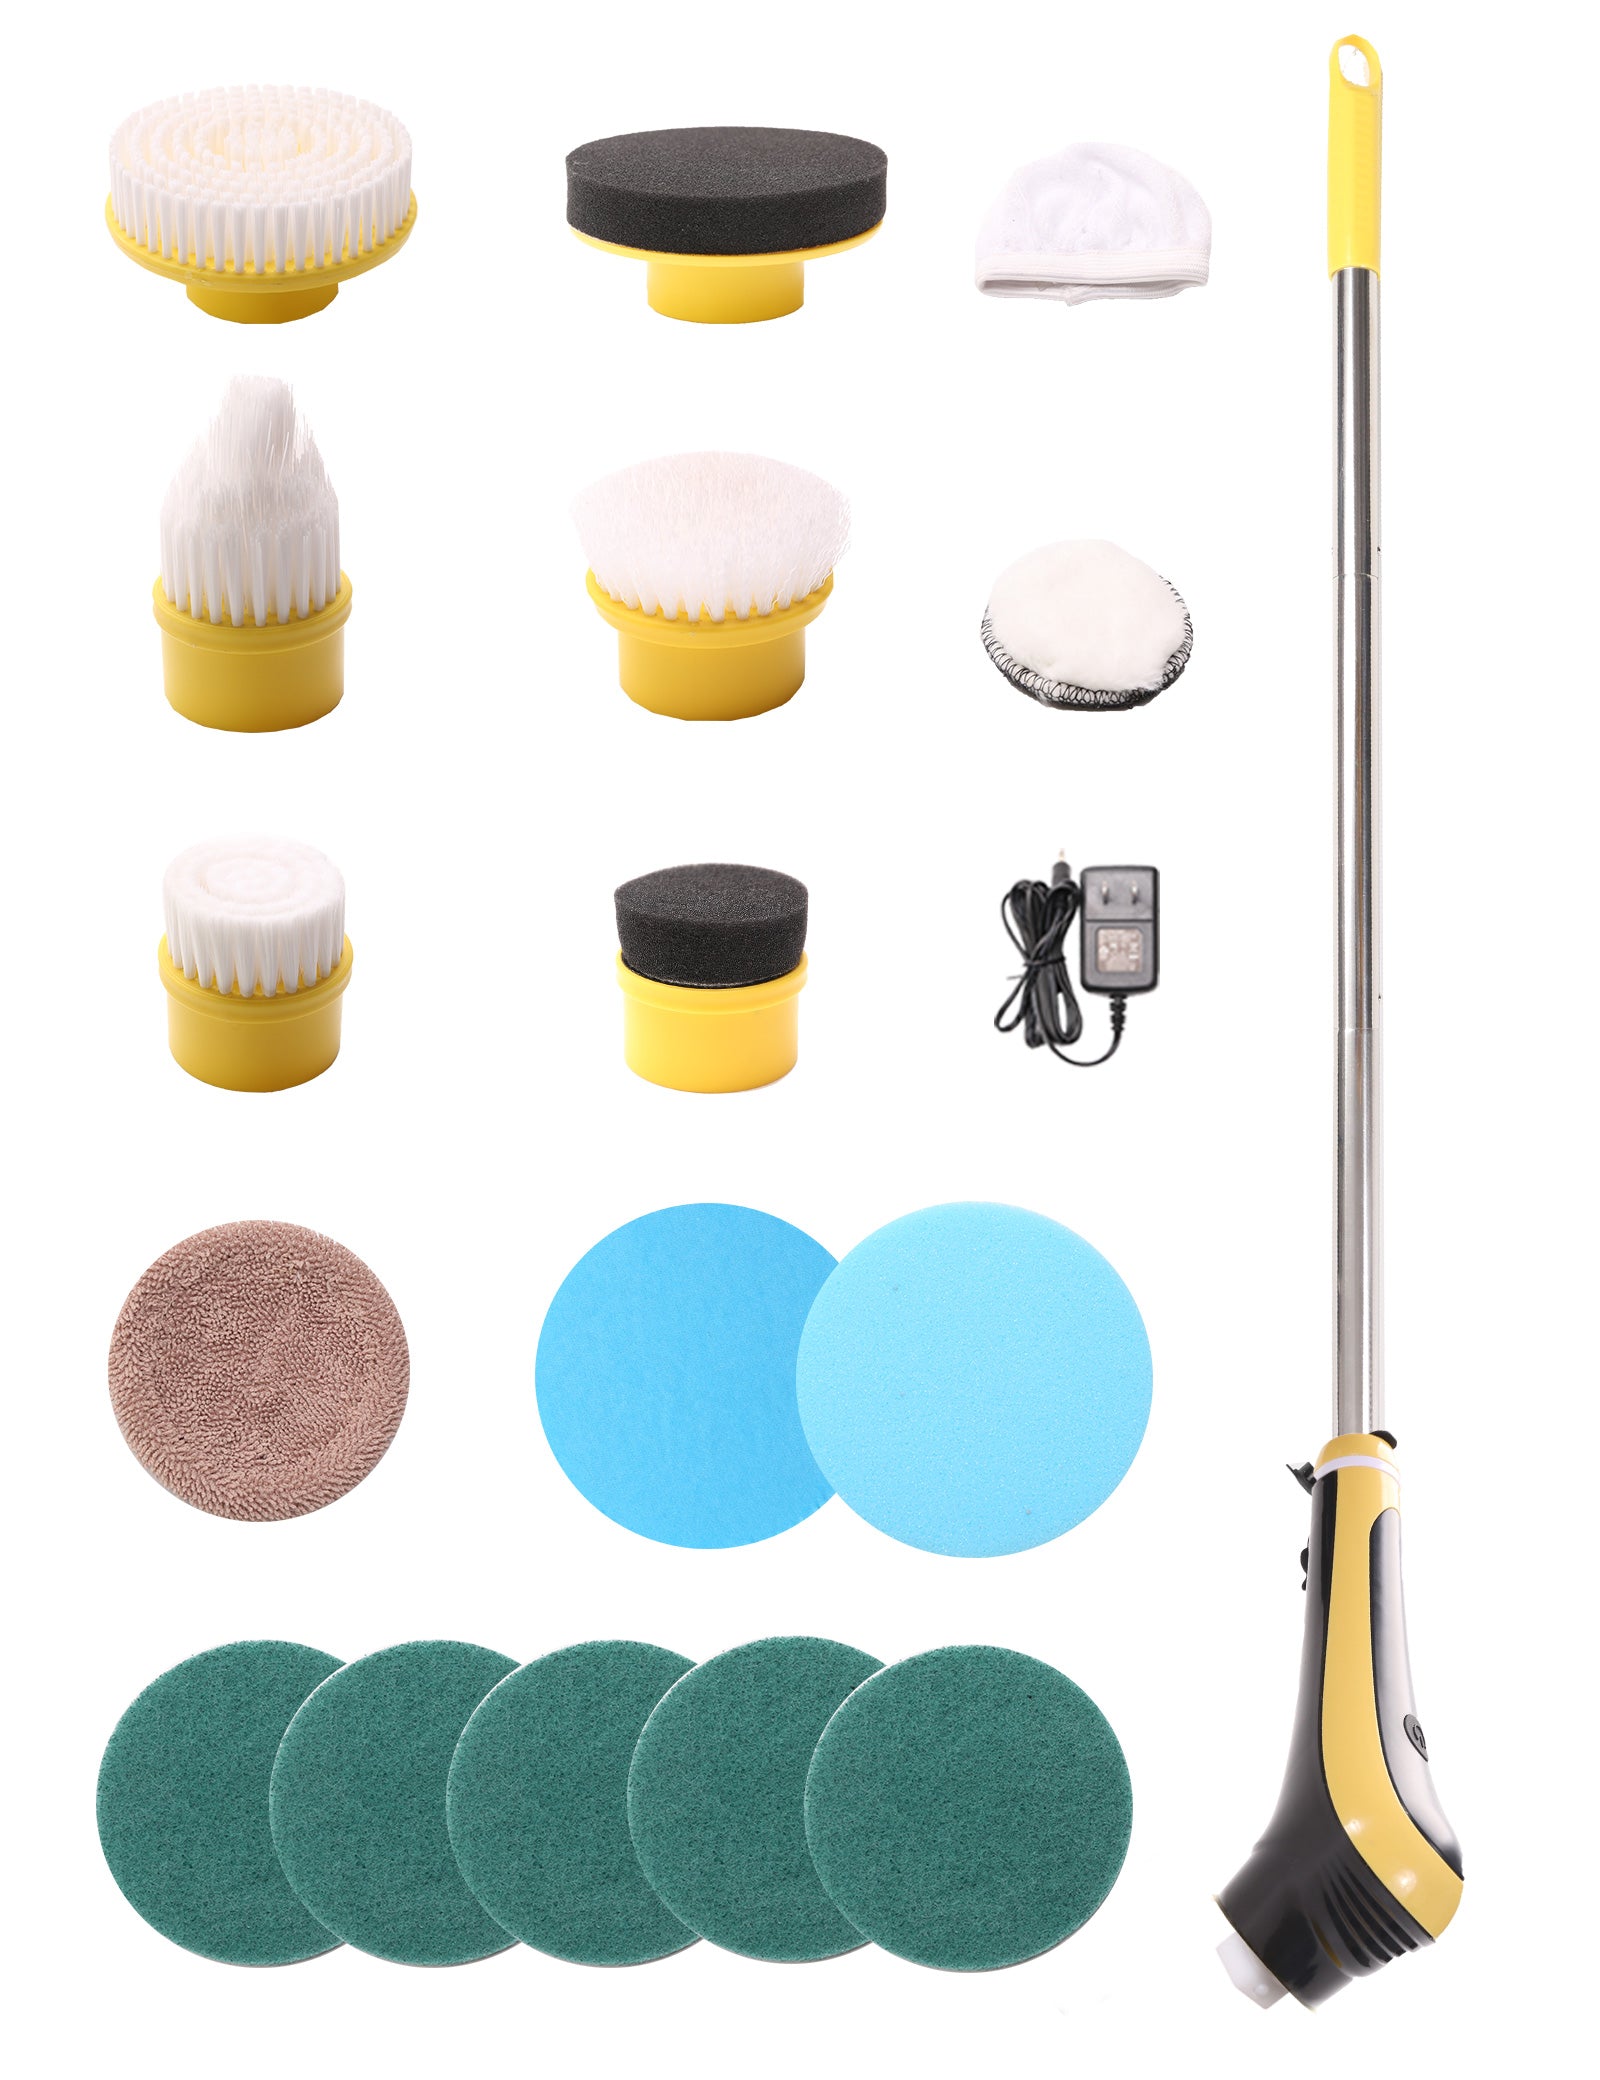 8 in 1 Electric Spin Scrubber Cordless Cleaning Brush Hard Floor / Bathroom  Mop